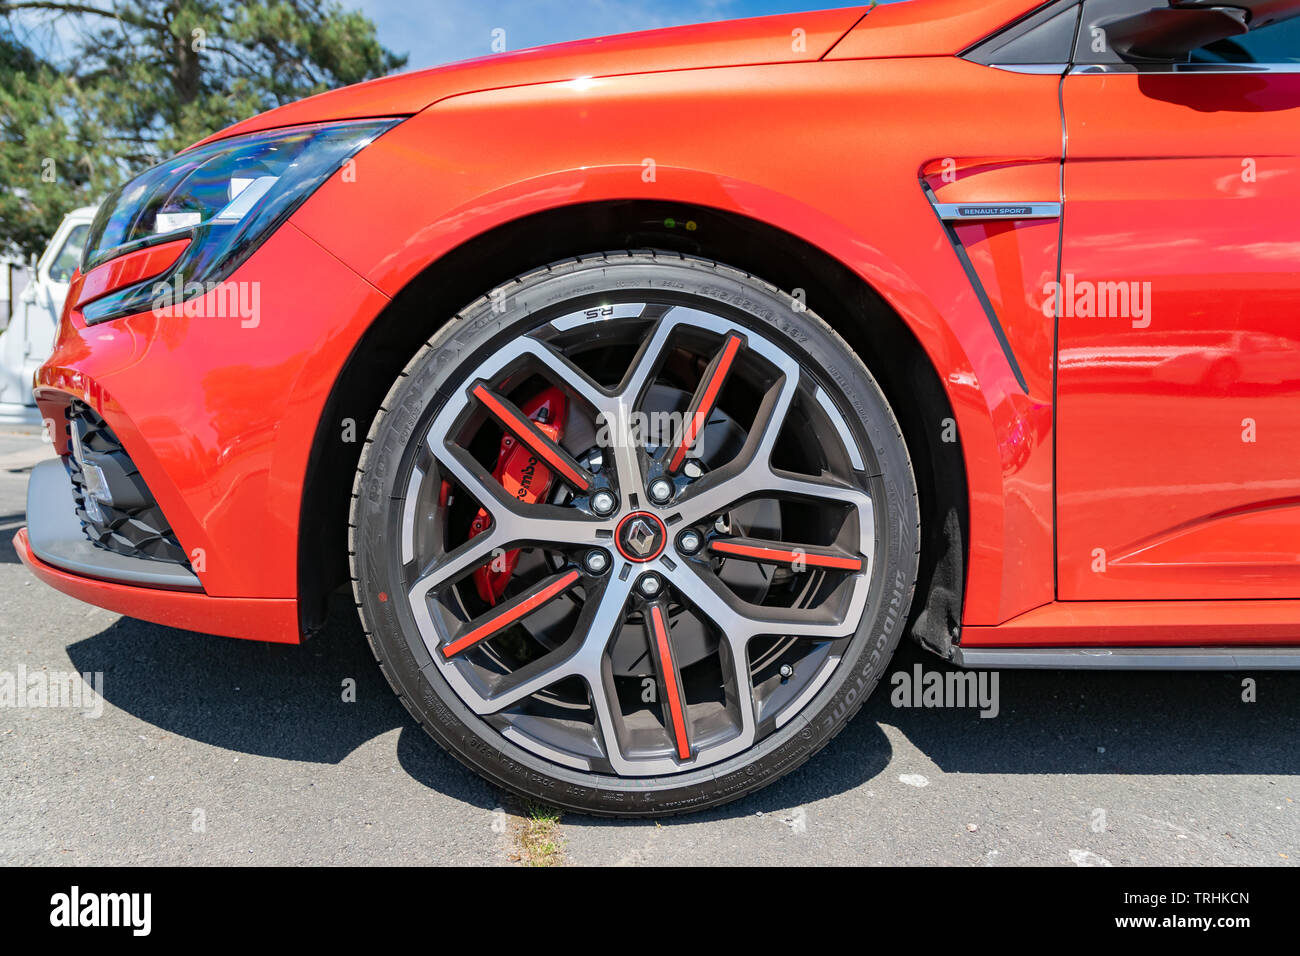 Wattrelos,FRANCE-June 02,2019: red Renault Megane IV RS,view of car wheel,car exhibited at the Renault Wattrelos Martinoire parking lot. Stock Photo